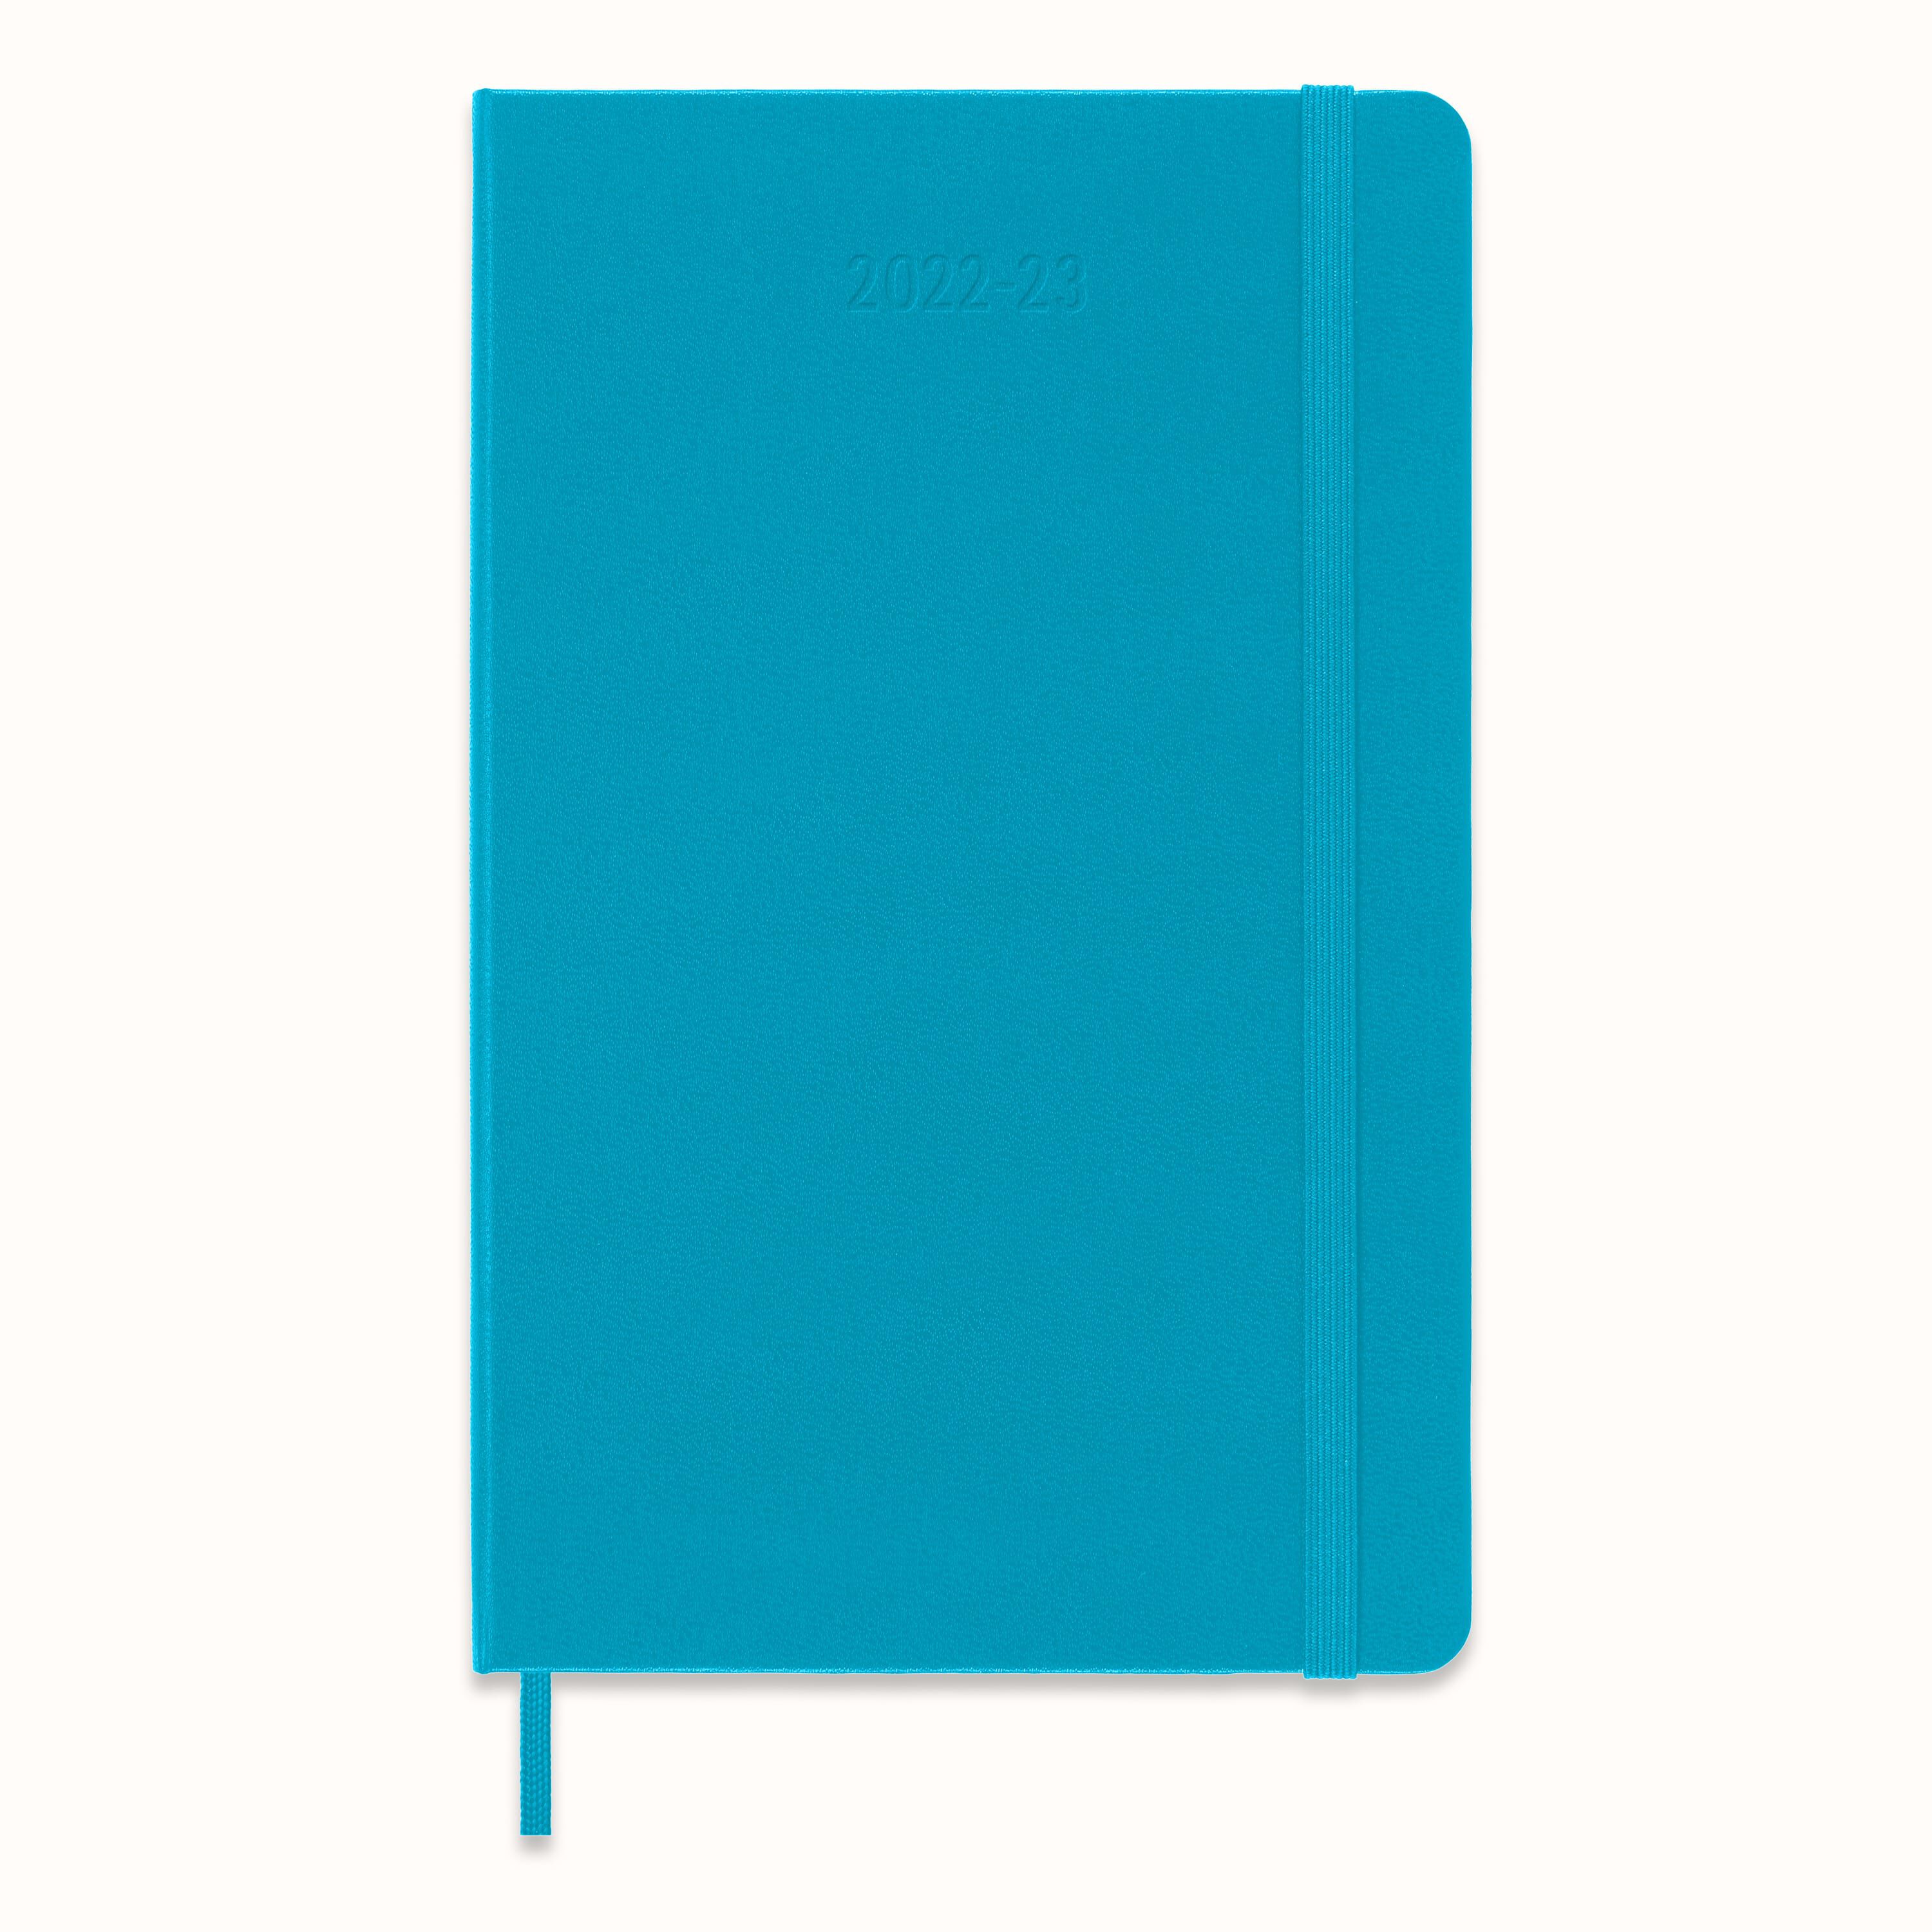 Hard Cover Moleskine Classic 18 Month 2019-2020 Weekly Planner XL 7.5" x 9.5" 